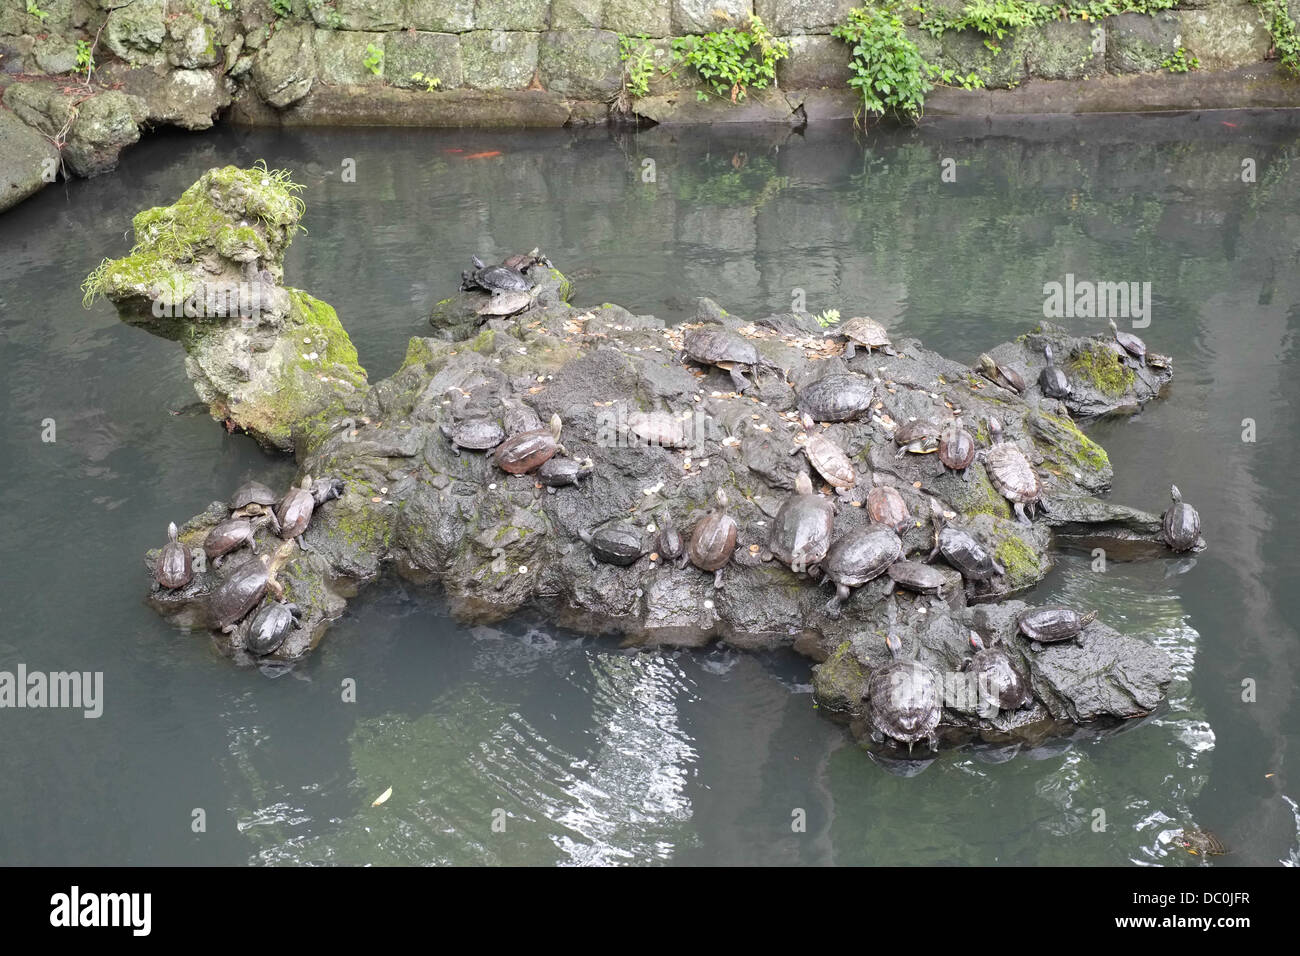 Turtles on a rock. Stock Photo